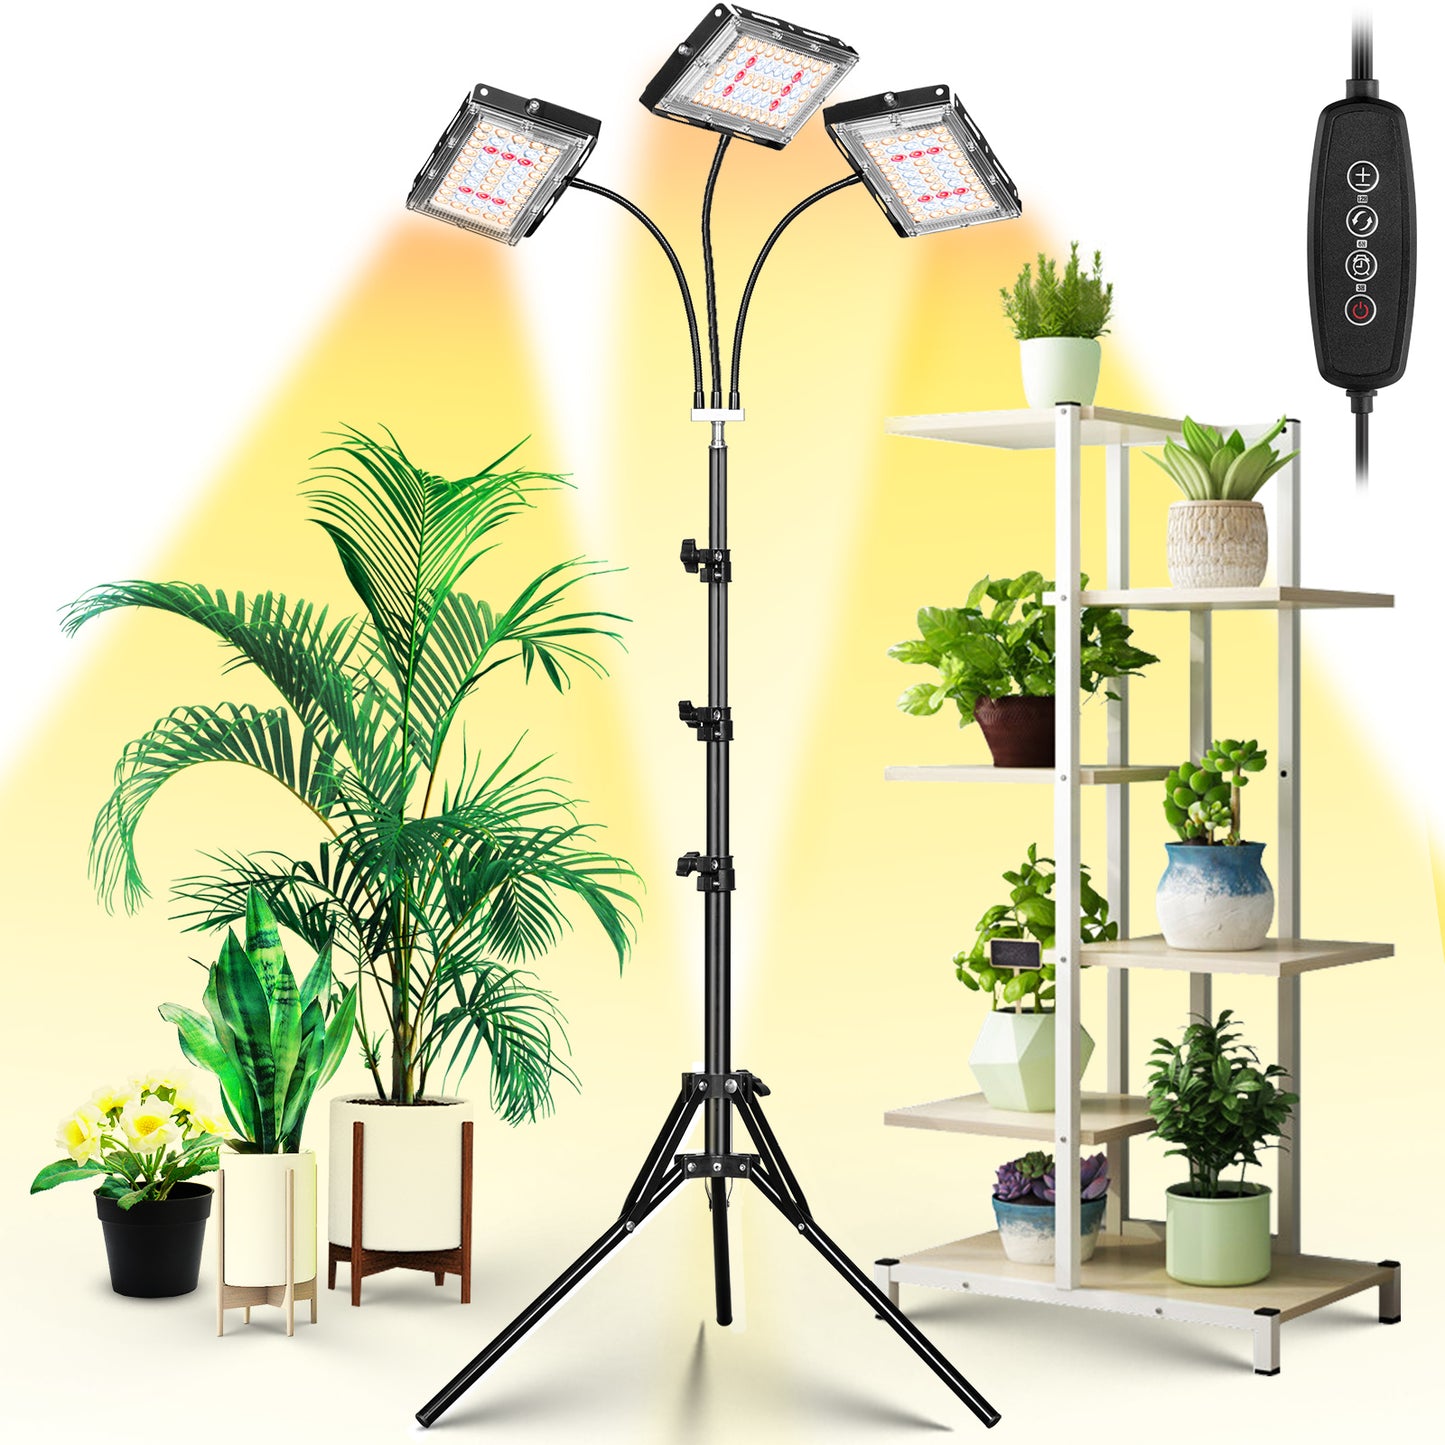 FOXGARDEN Tri-head LED Grow Light with Stand and Timer